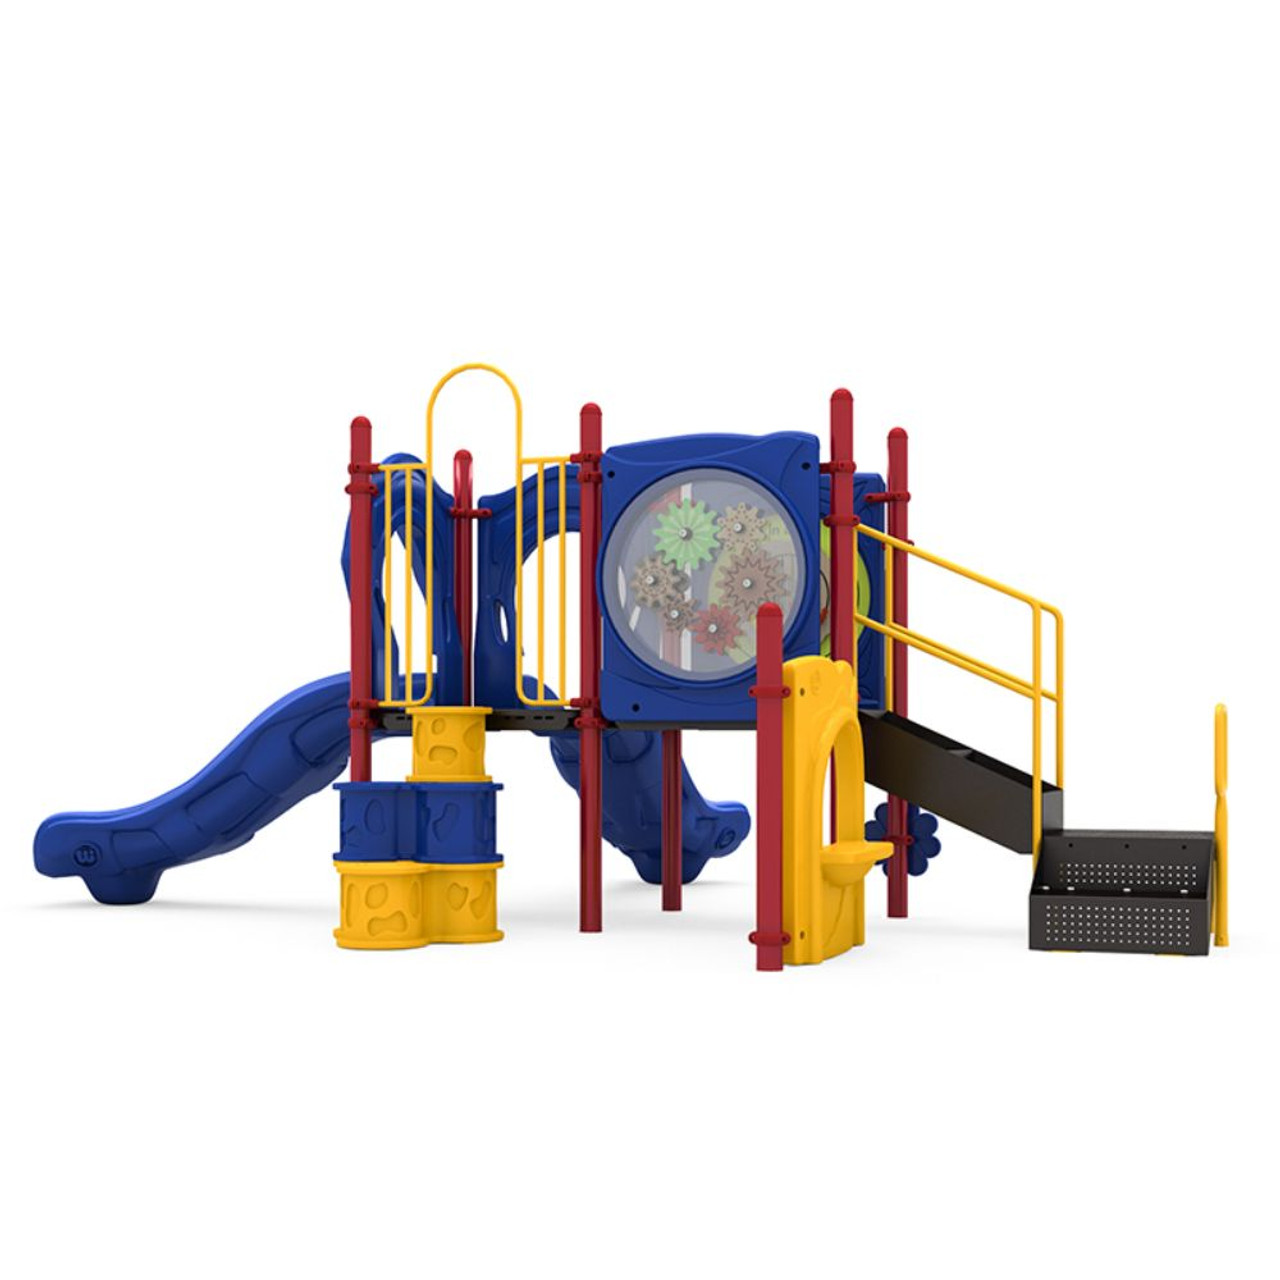 Sunny Days Playset - primary - no roof